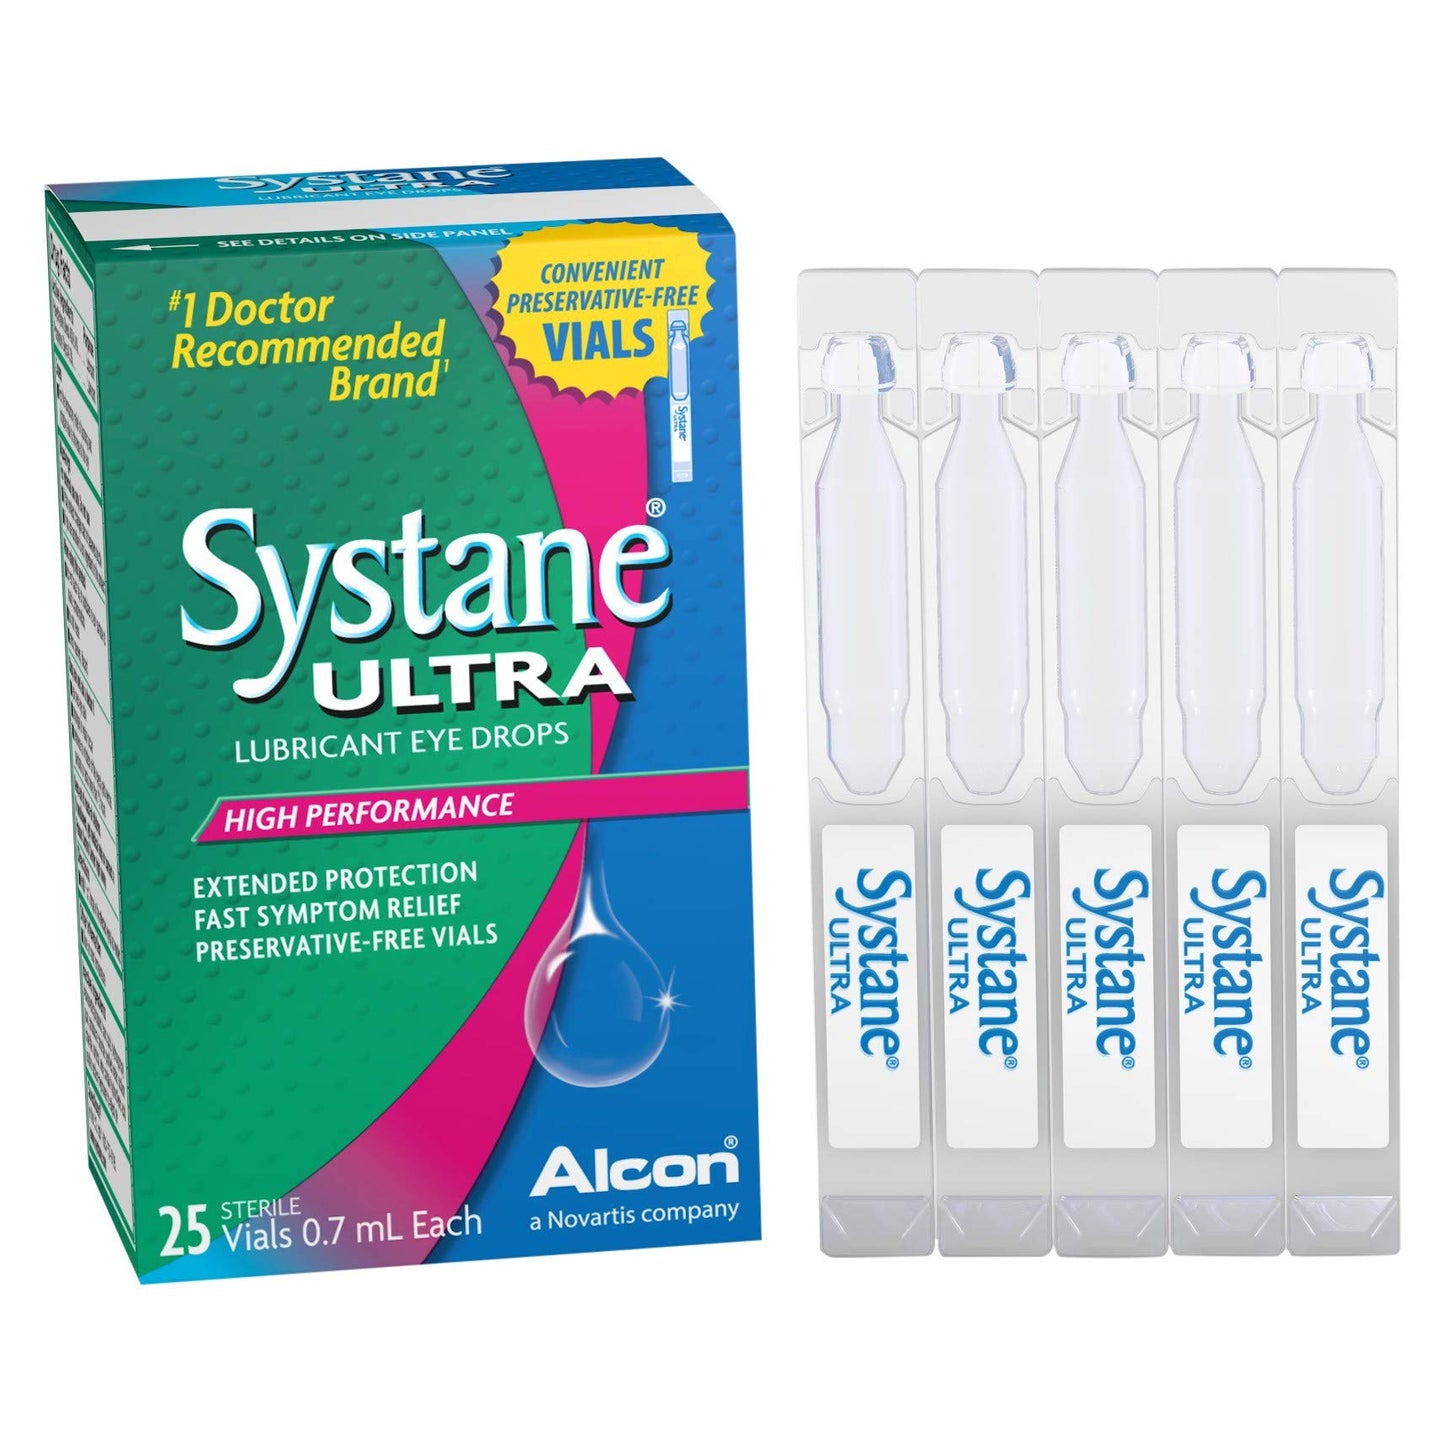 Systane Ultra Lubricant Eye Drops 0.7 mL vials 25 ea (Pack of 2)